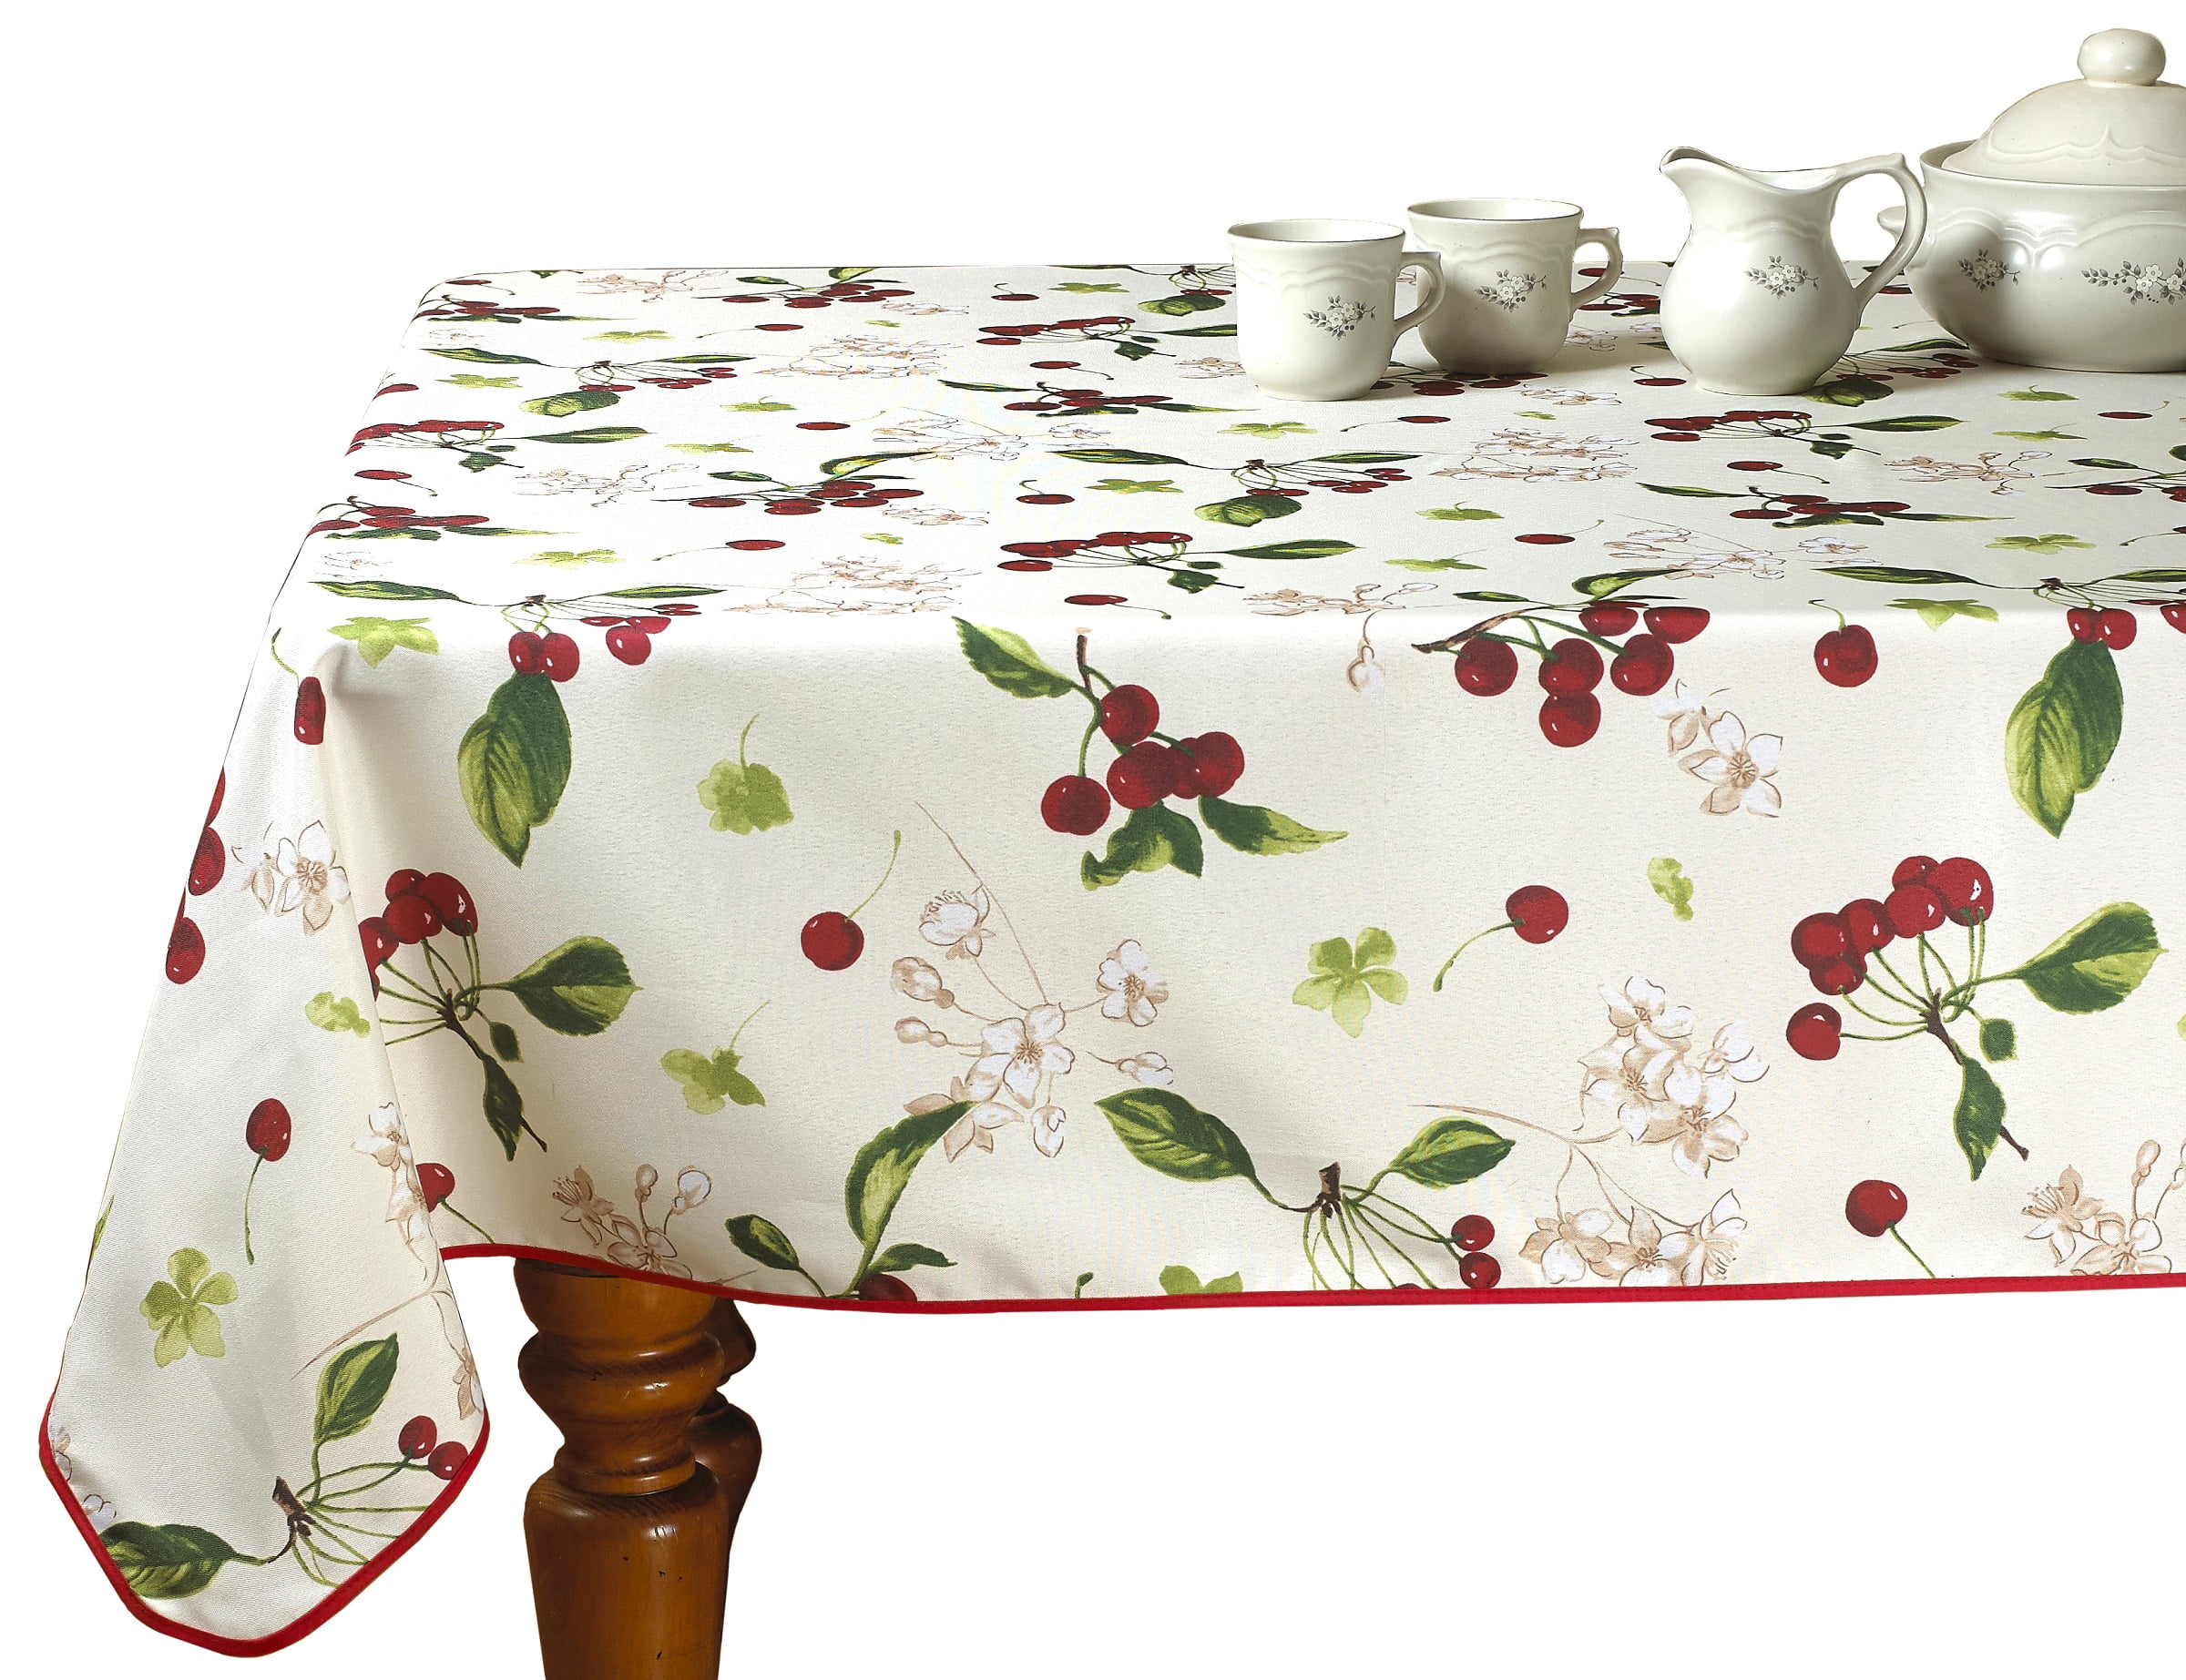 ReTrO Style Black CHERRY Cherries OILCLOTH Dining Table RUNNER RV BBQ Pool Party 